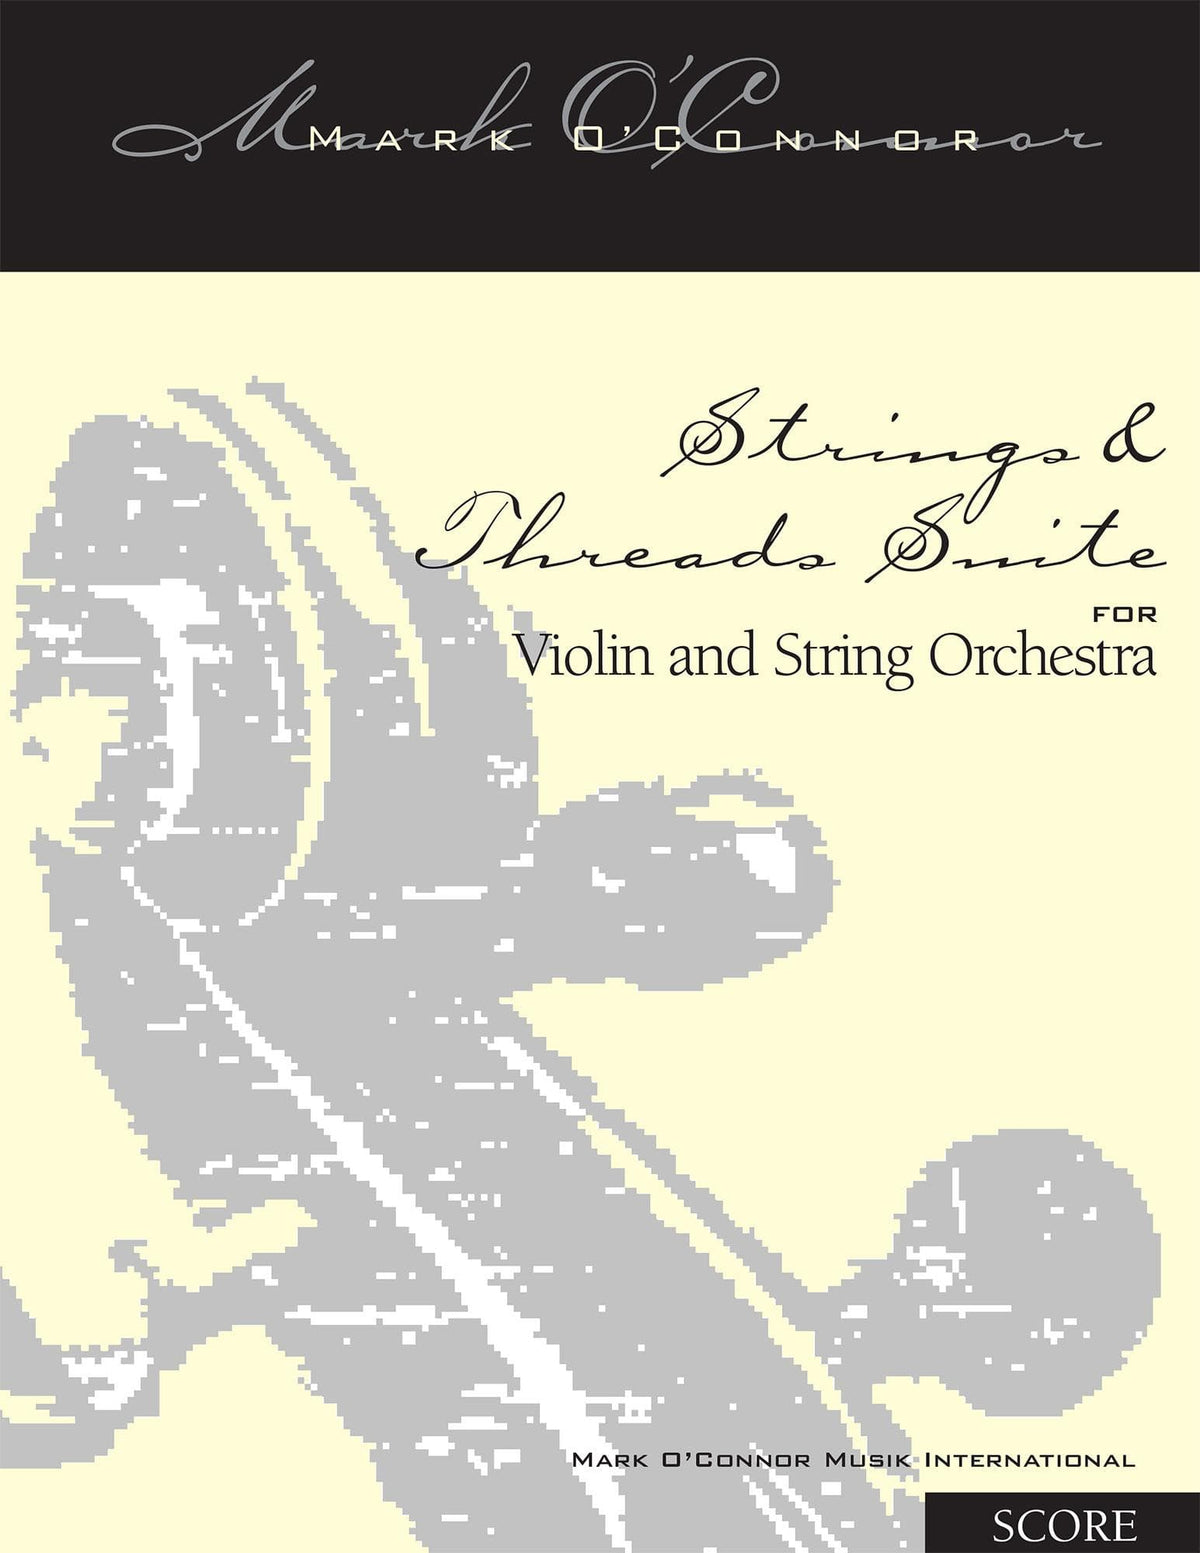 O'Connor, Mark - Strings & Threads Suite for Violin and String Orchestra - Score - Digital Download